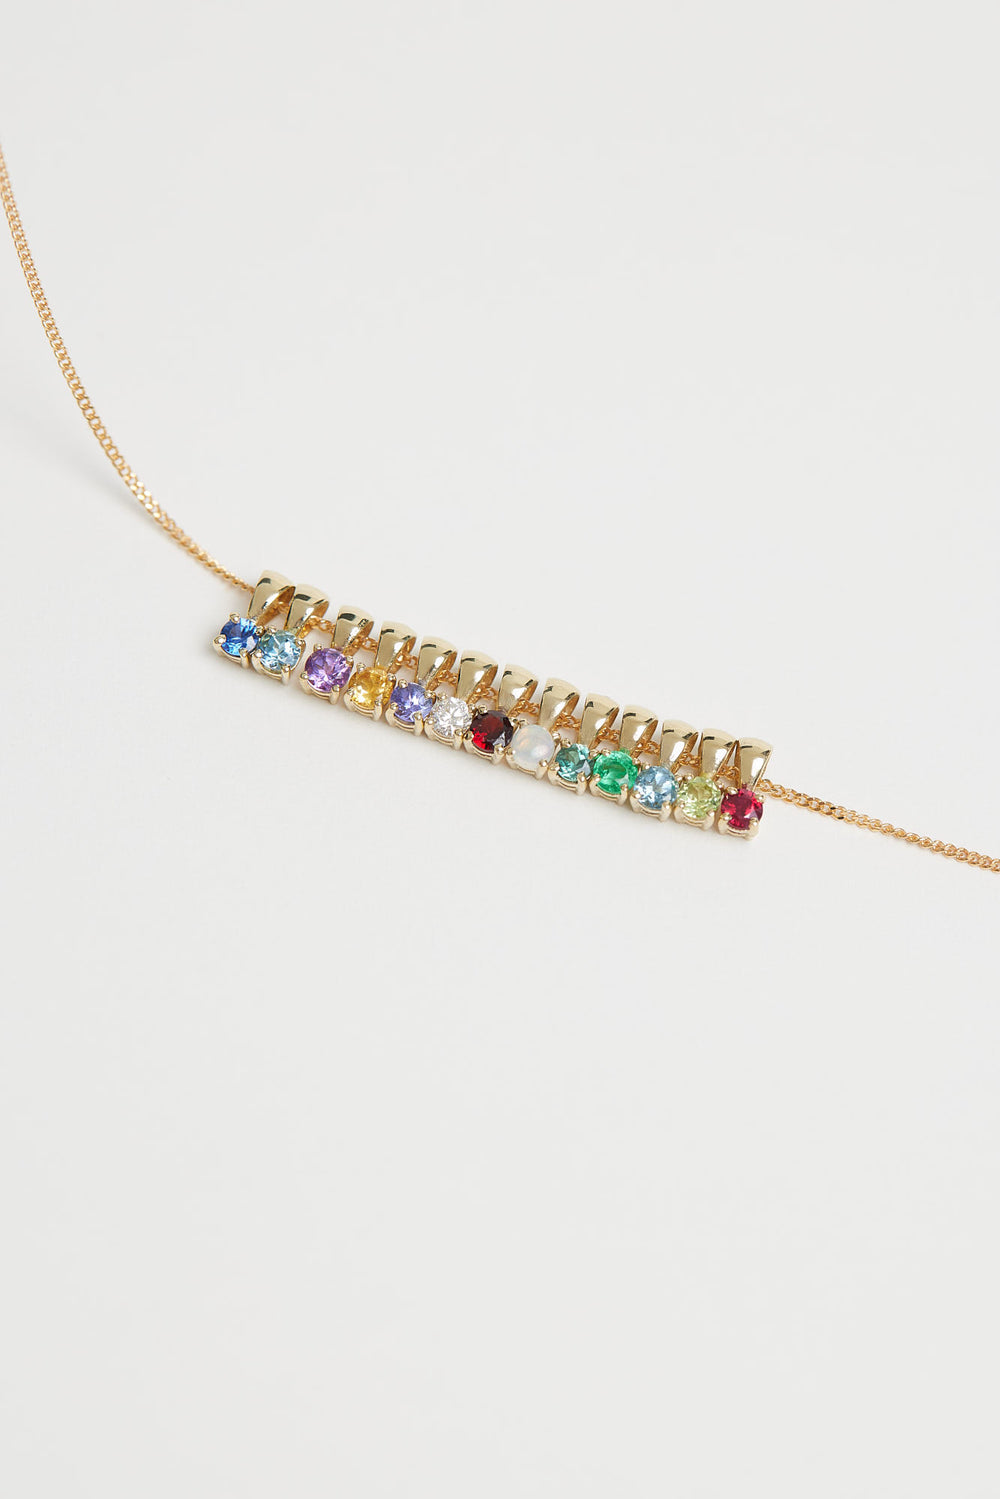 Birthstone Necklace | 9K Yellow Gold